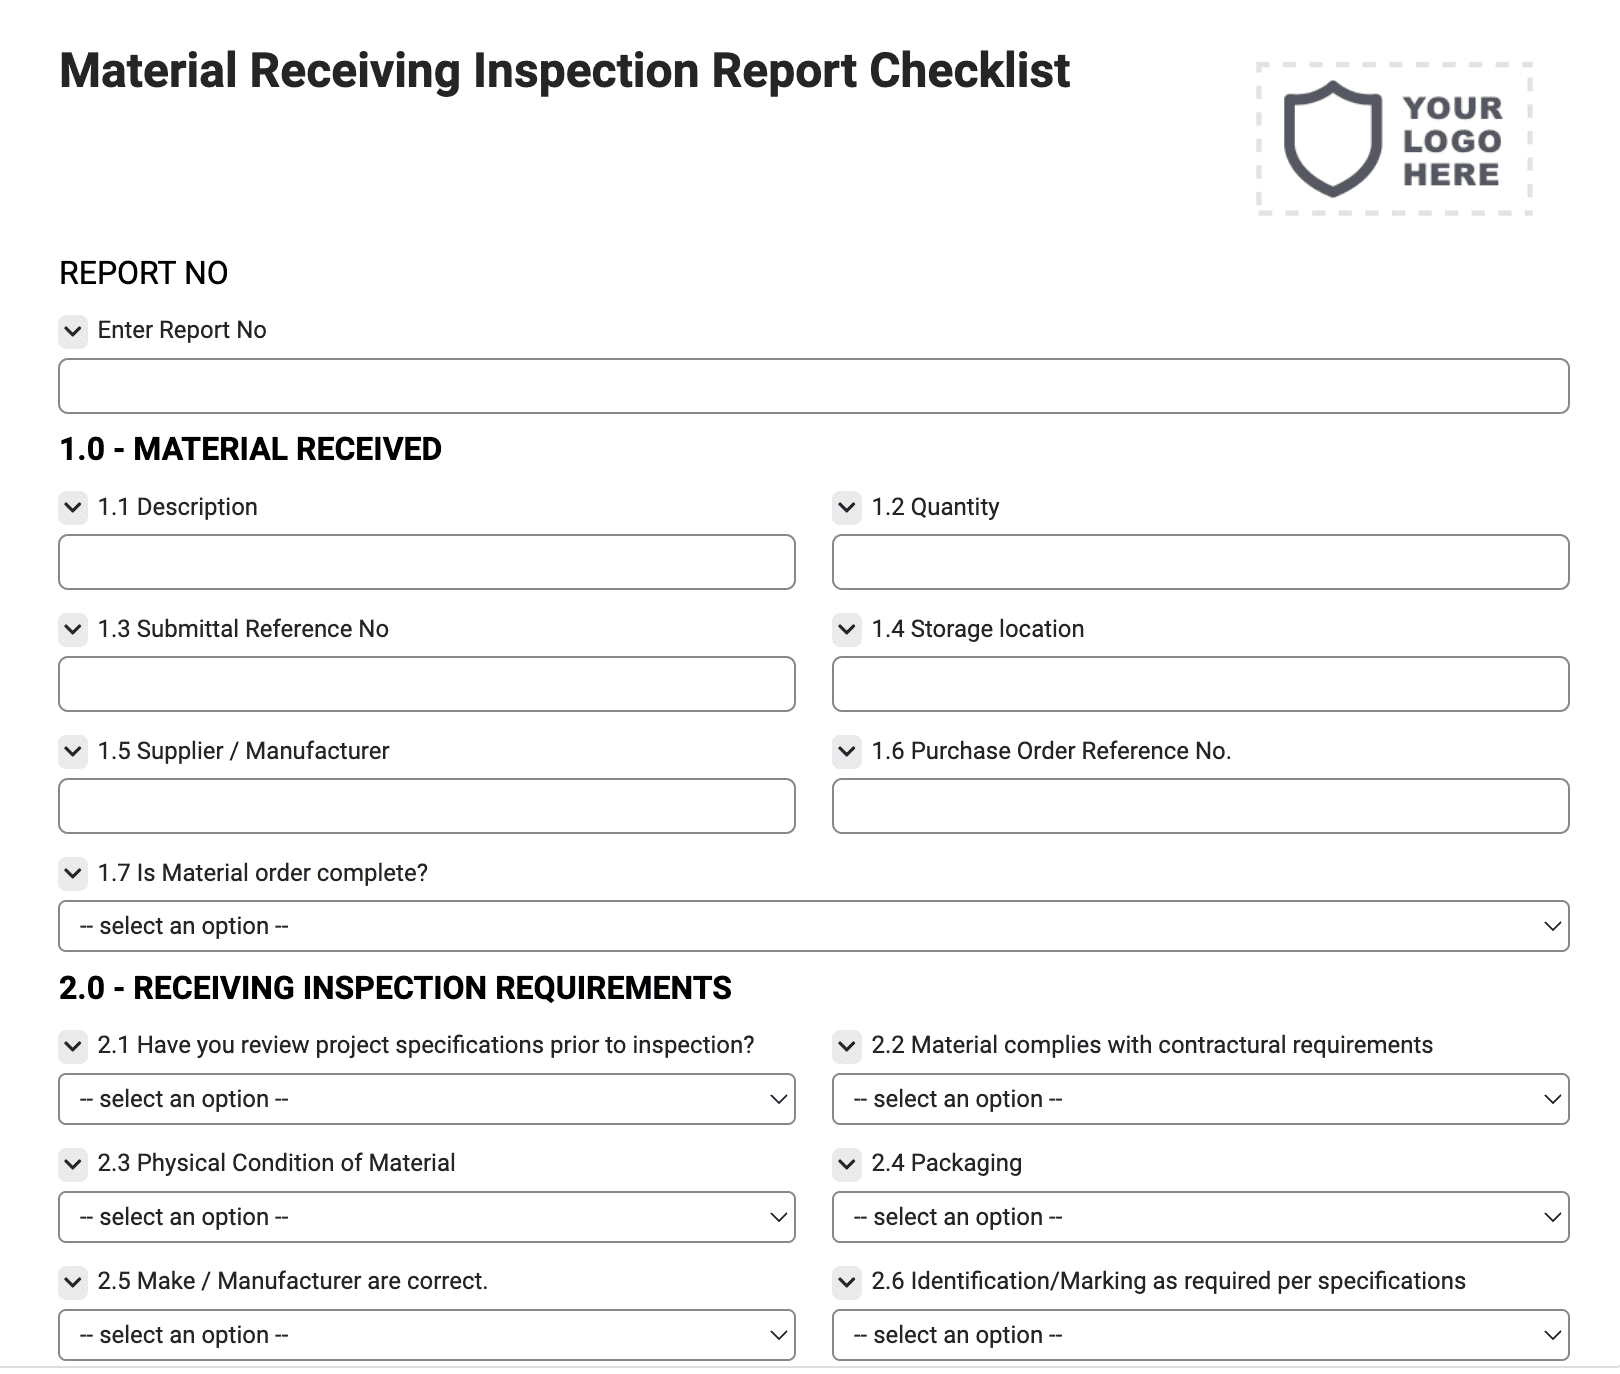 Material Receiving Inspection Report Checklist